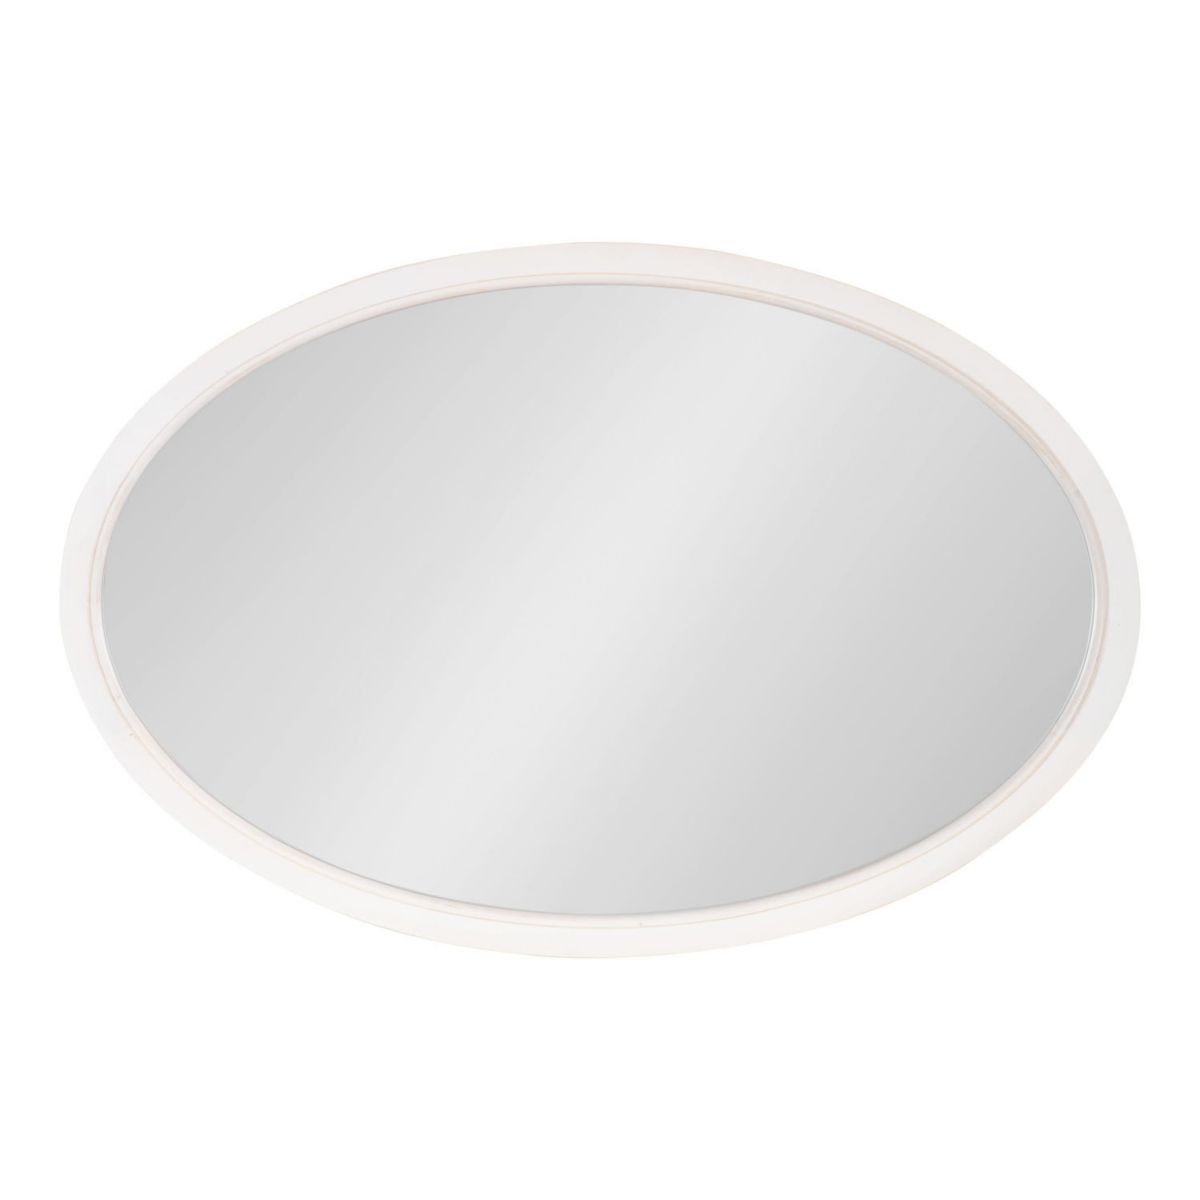 Kate and Laurel Hogan Oval Framed Wall Mirror Kate and Laurel